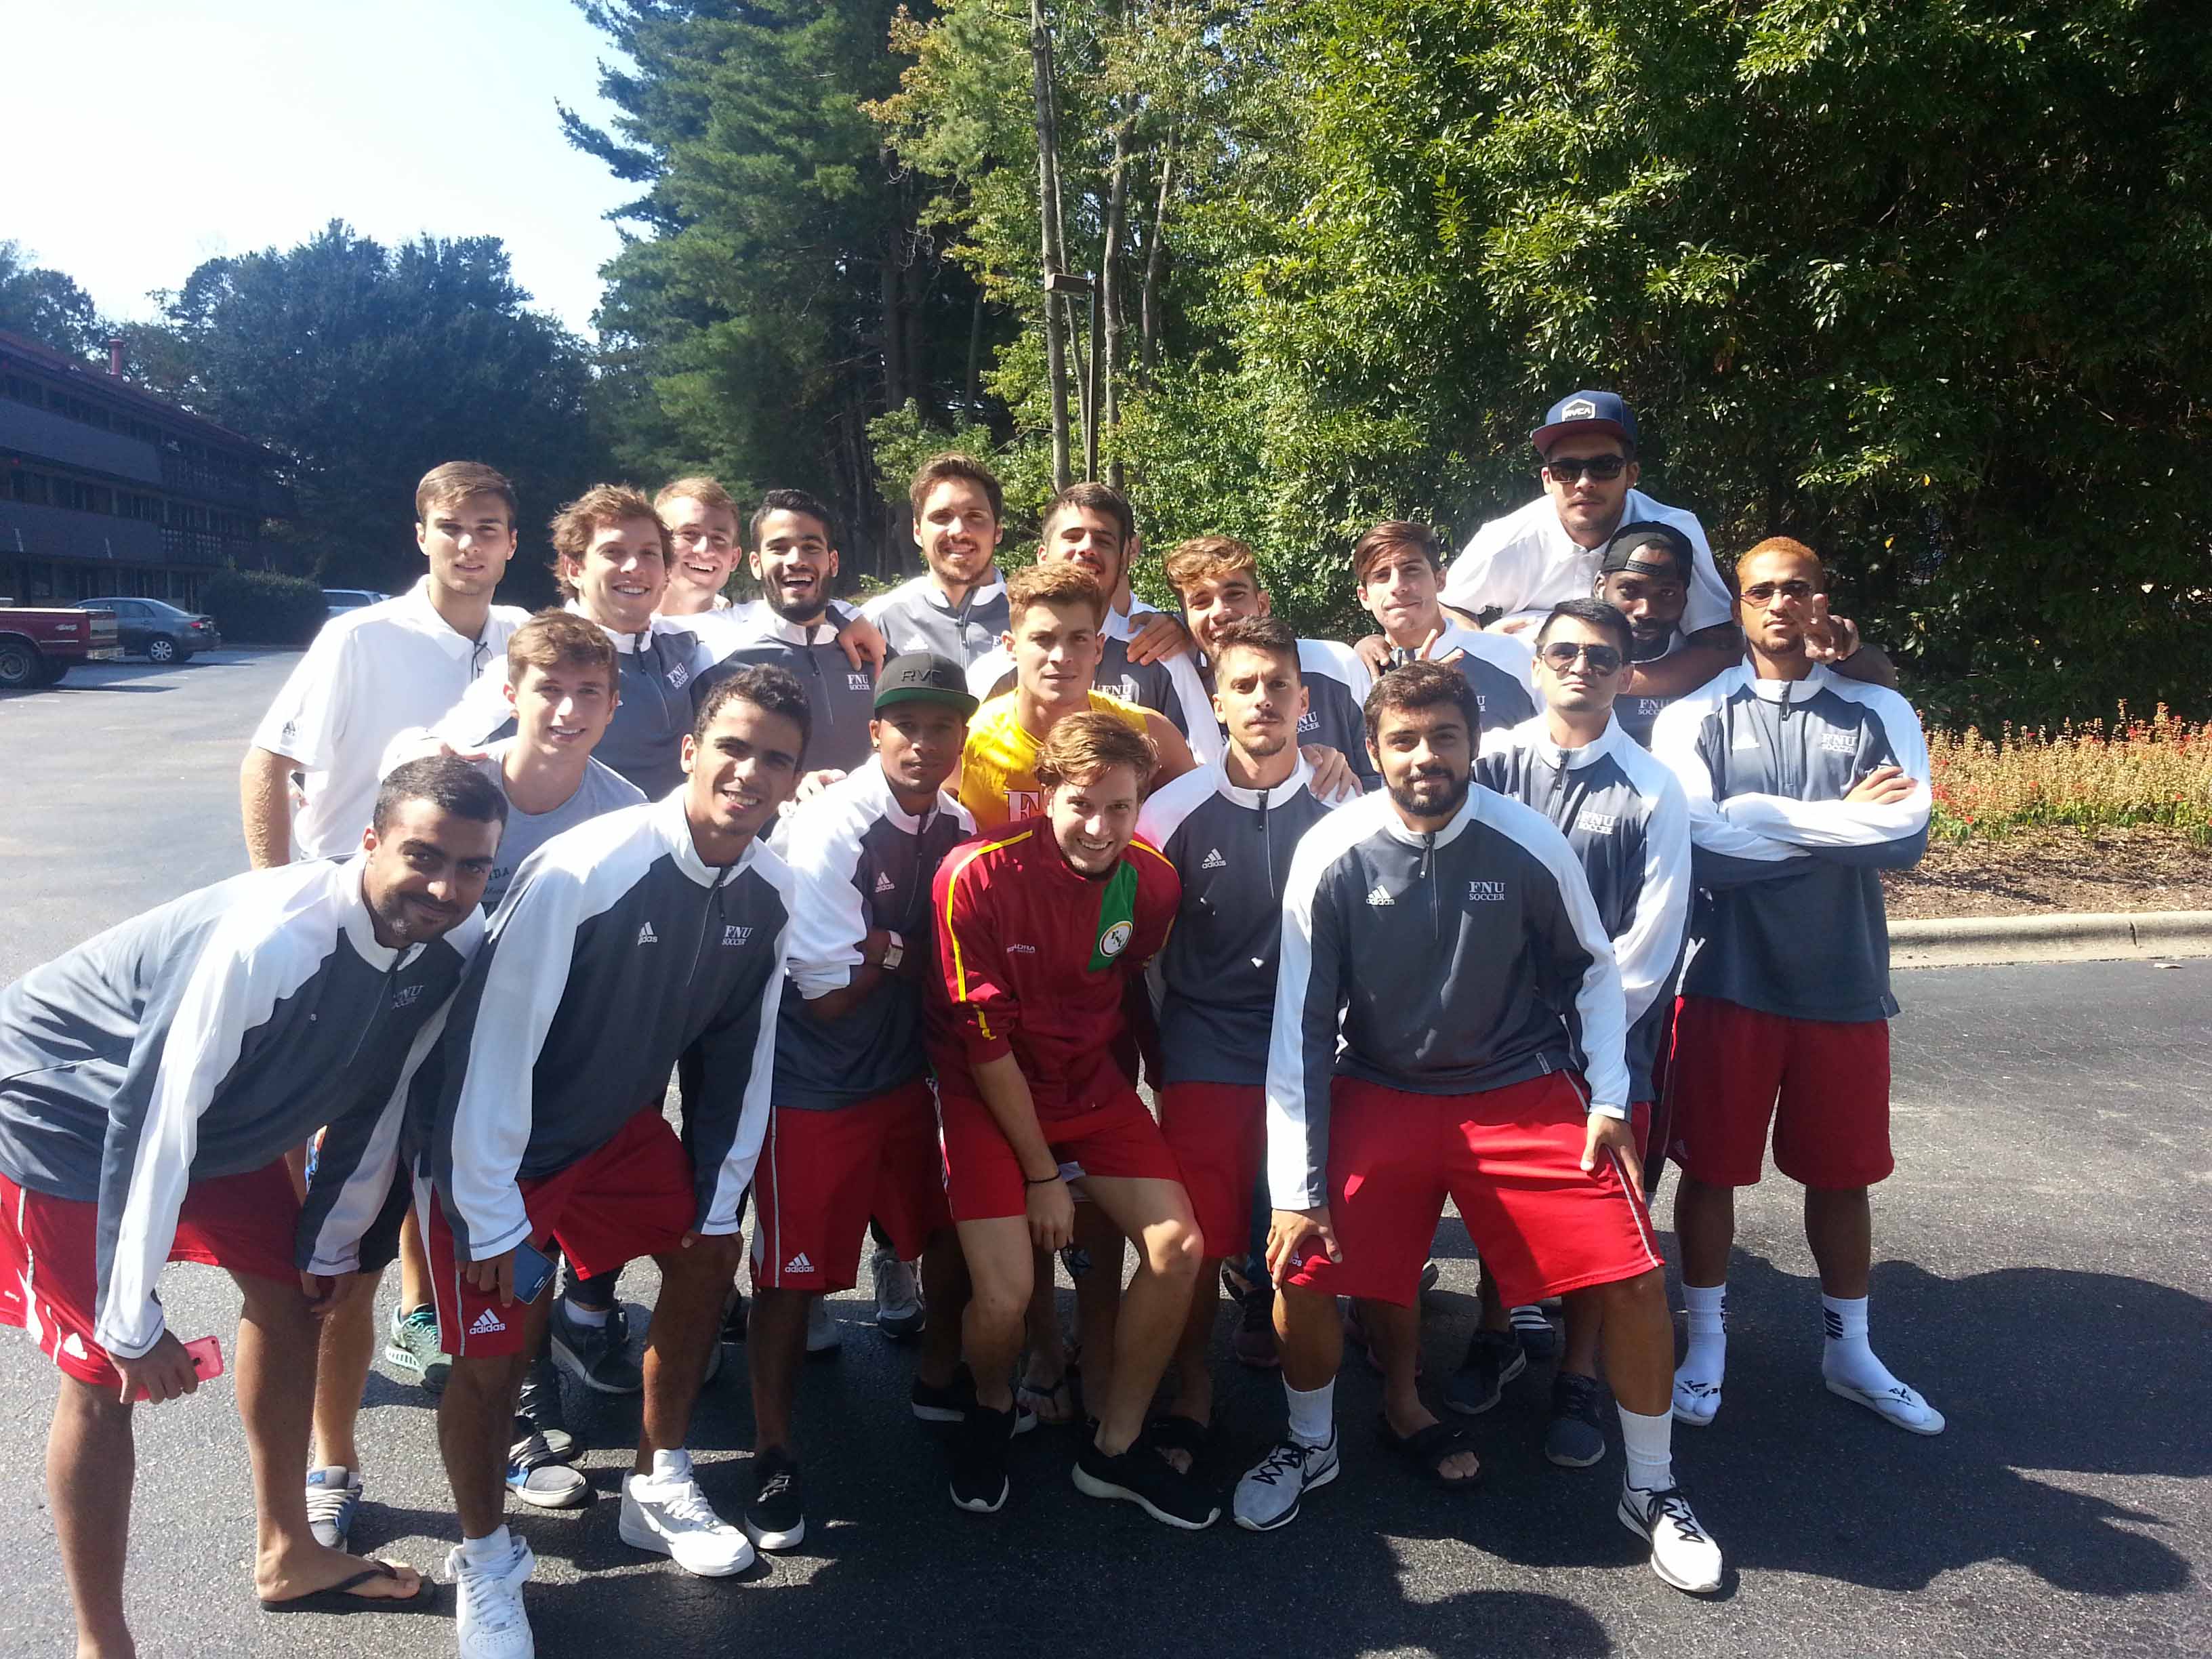 Men's Soccer at hotel before playing game vs Warren Wilson College in which FNU won 21-0